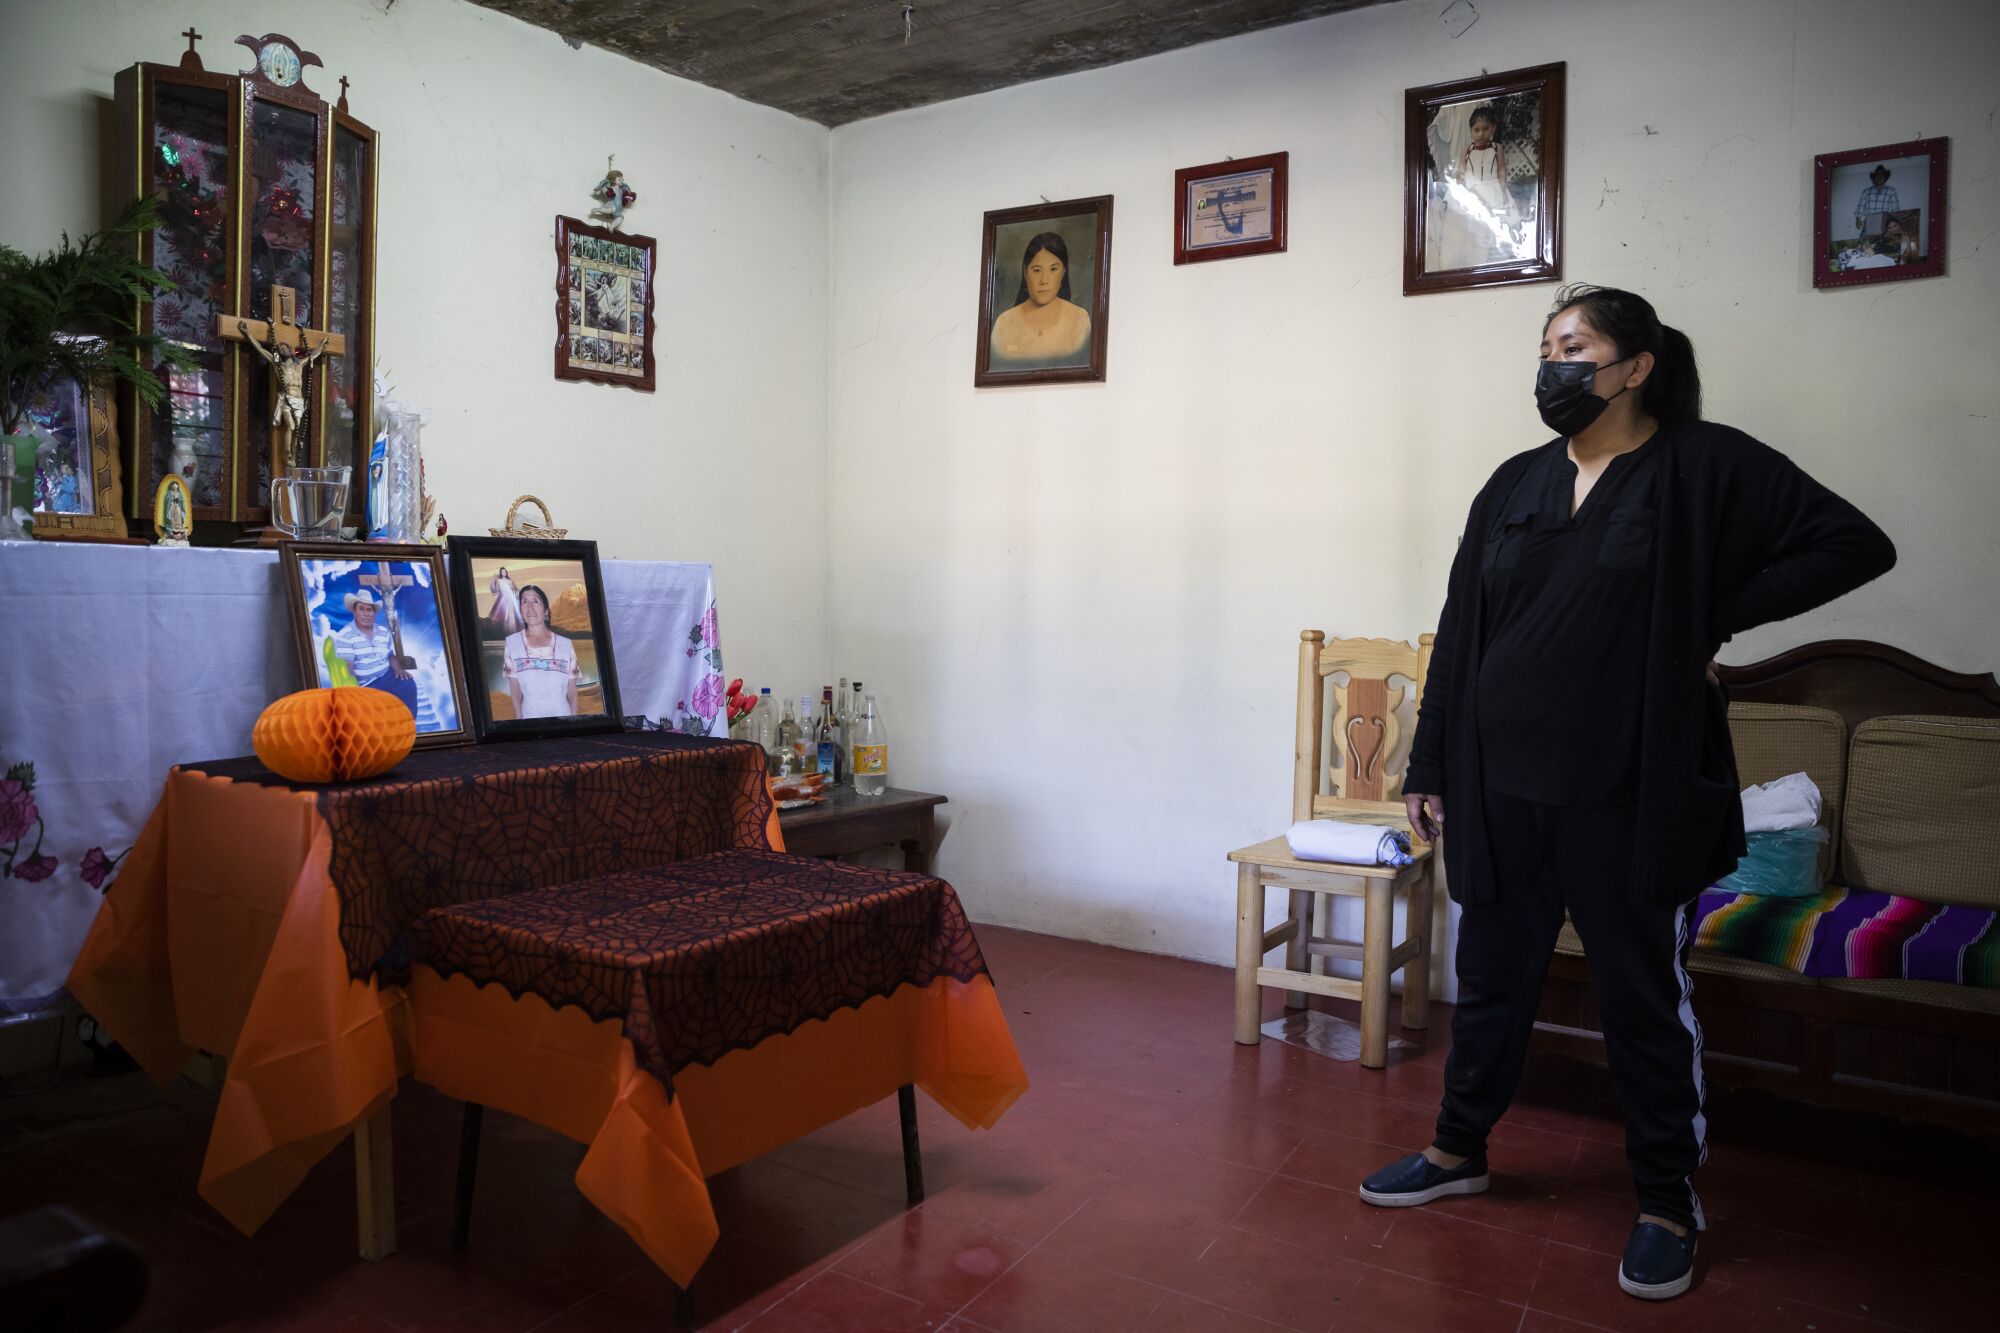 A woman dressed in black speaks next to an altar with photos 